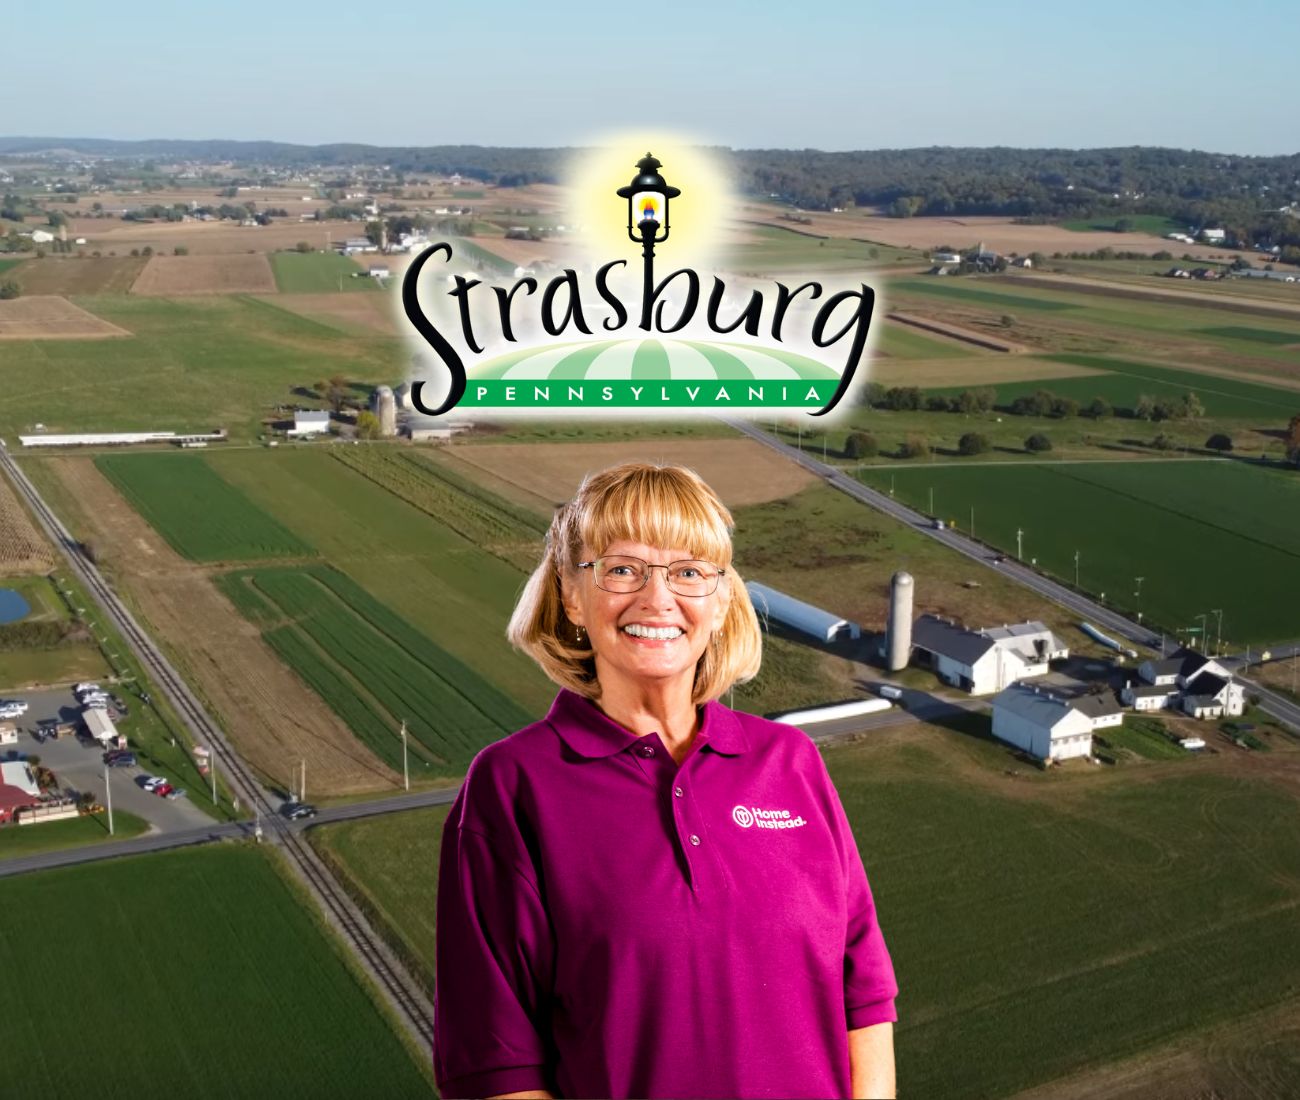 Home Instead caregiver with Strasburg Pennsylvania in the background